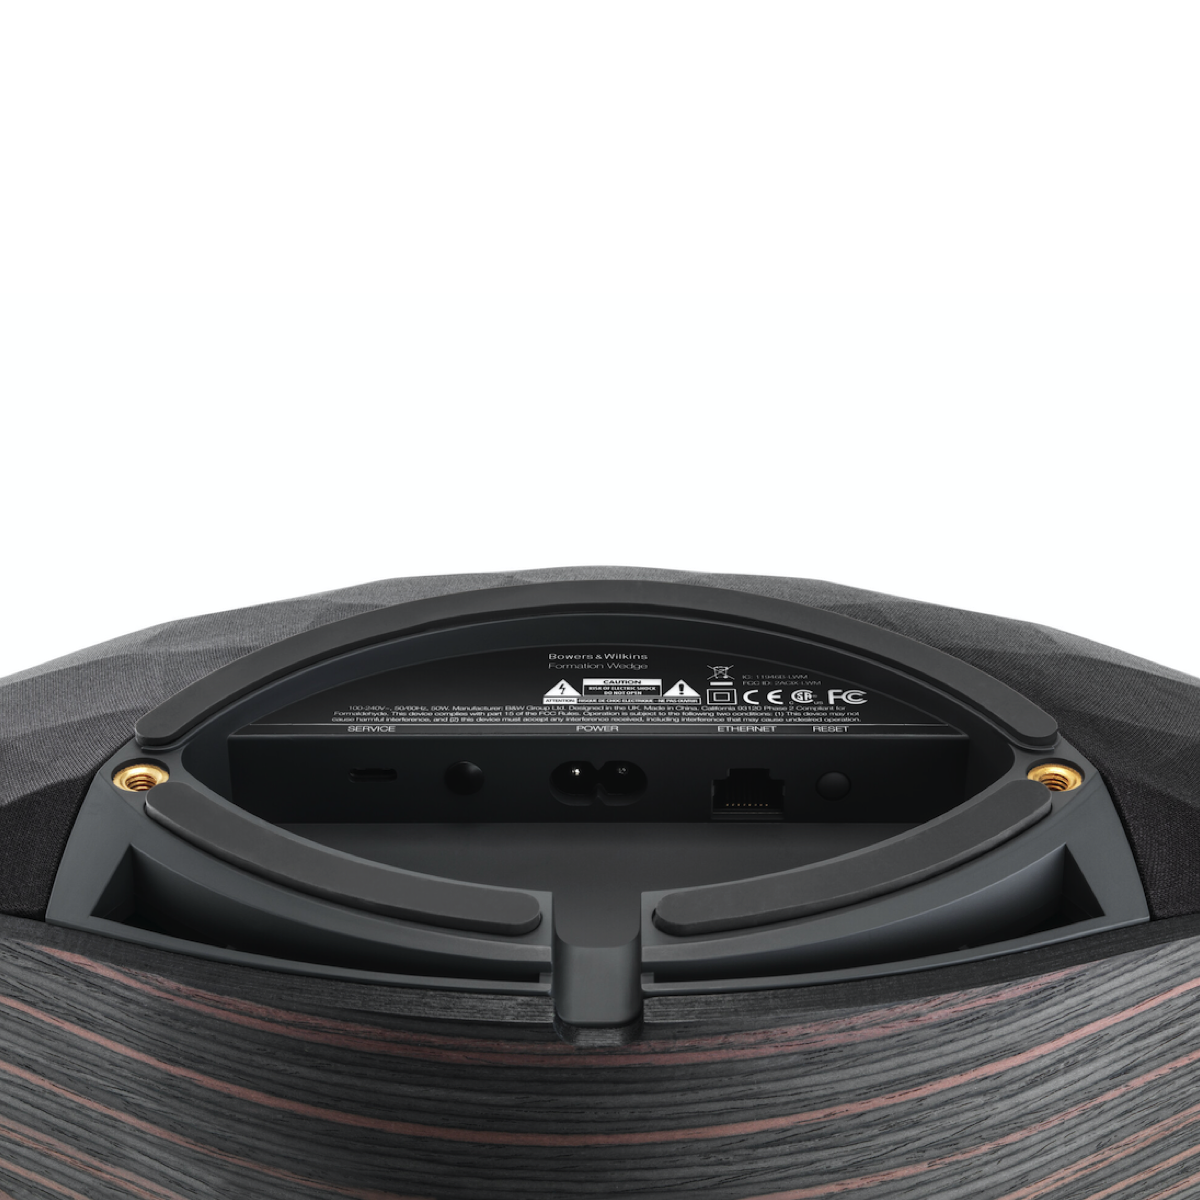 Bowers & Wilkins - Formation Wedge - Auratech LLC